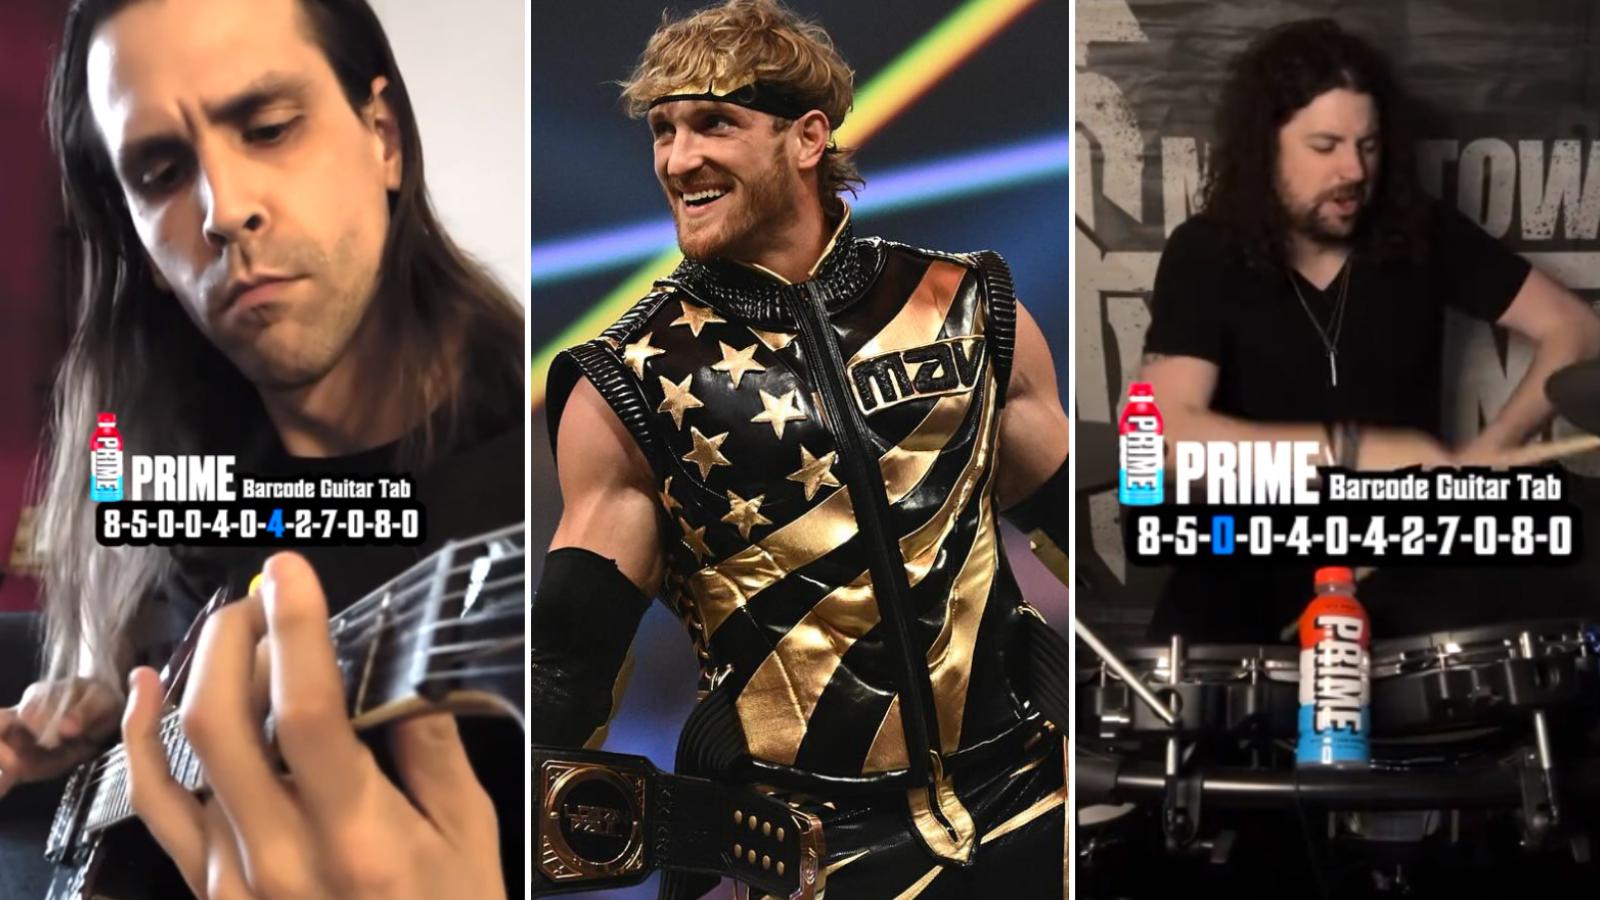 logan paul in wwe gear as band makes song using prime bottle